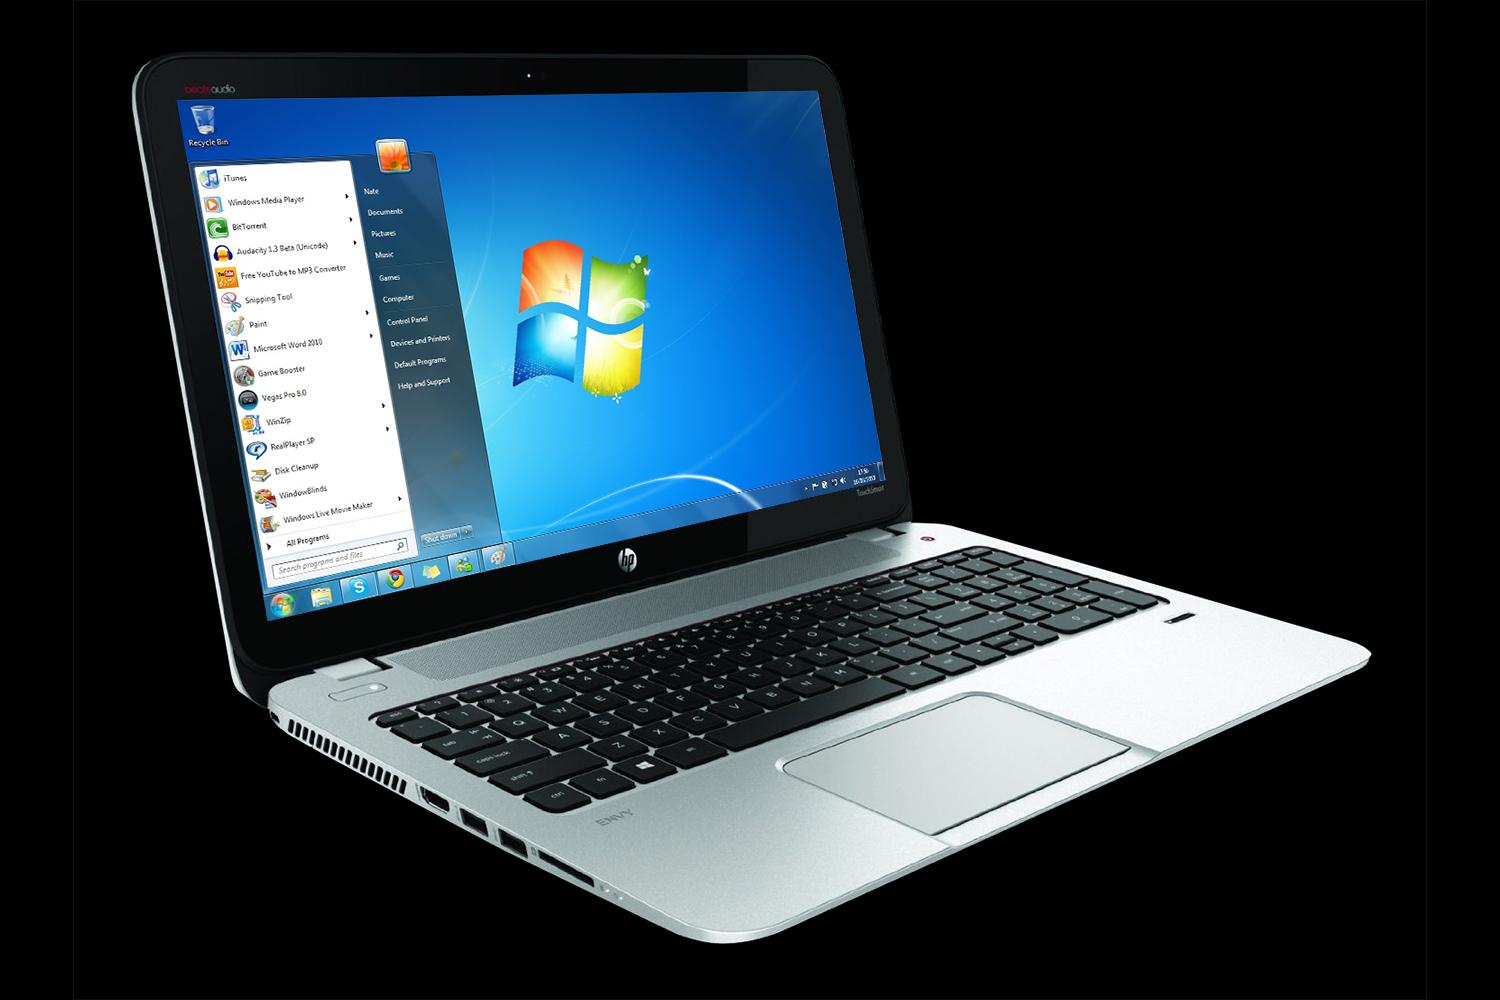 HP says Windows 7 is Back by popular demand gives Windows 8 the